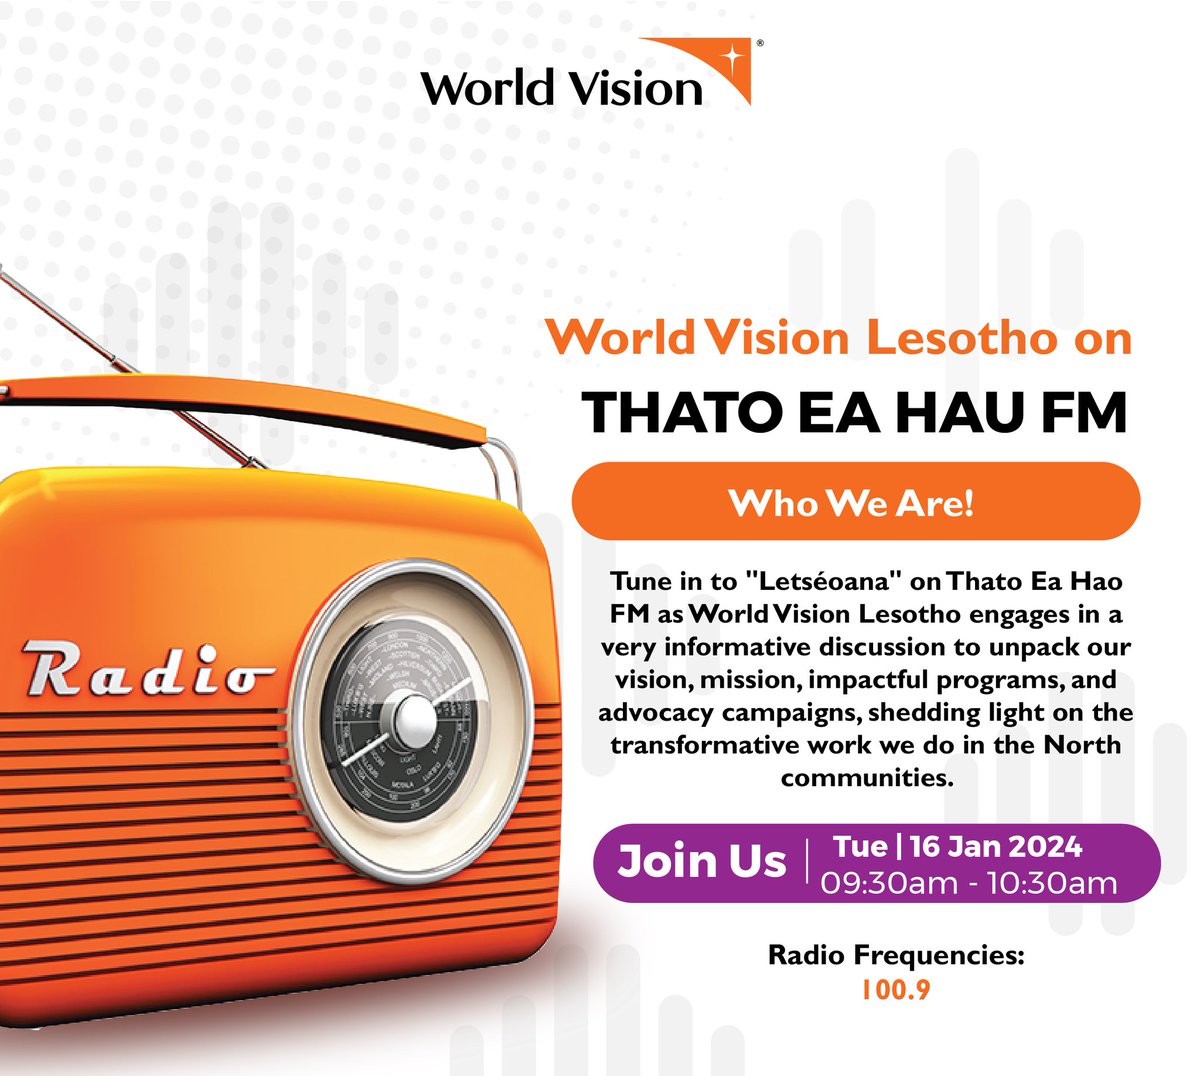 Join us on THATO EA HAU RADIO STATION (100.9 FM)  as World Vision International Lesotho takes the spotlight tomorrow at 9:30am! 

🎙️ We're excited to discuss our mission, vision, impactful programmes, and advocacy campaigns. 

 #WorldVisionLesotho #CommunityImpact #ThatoEaHauFM